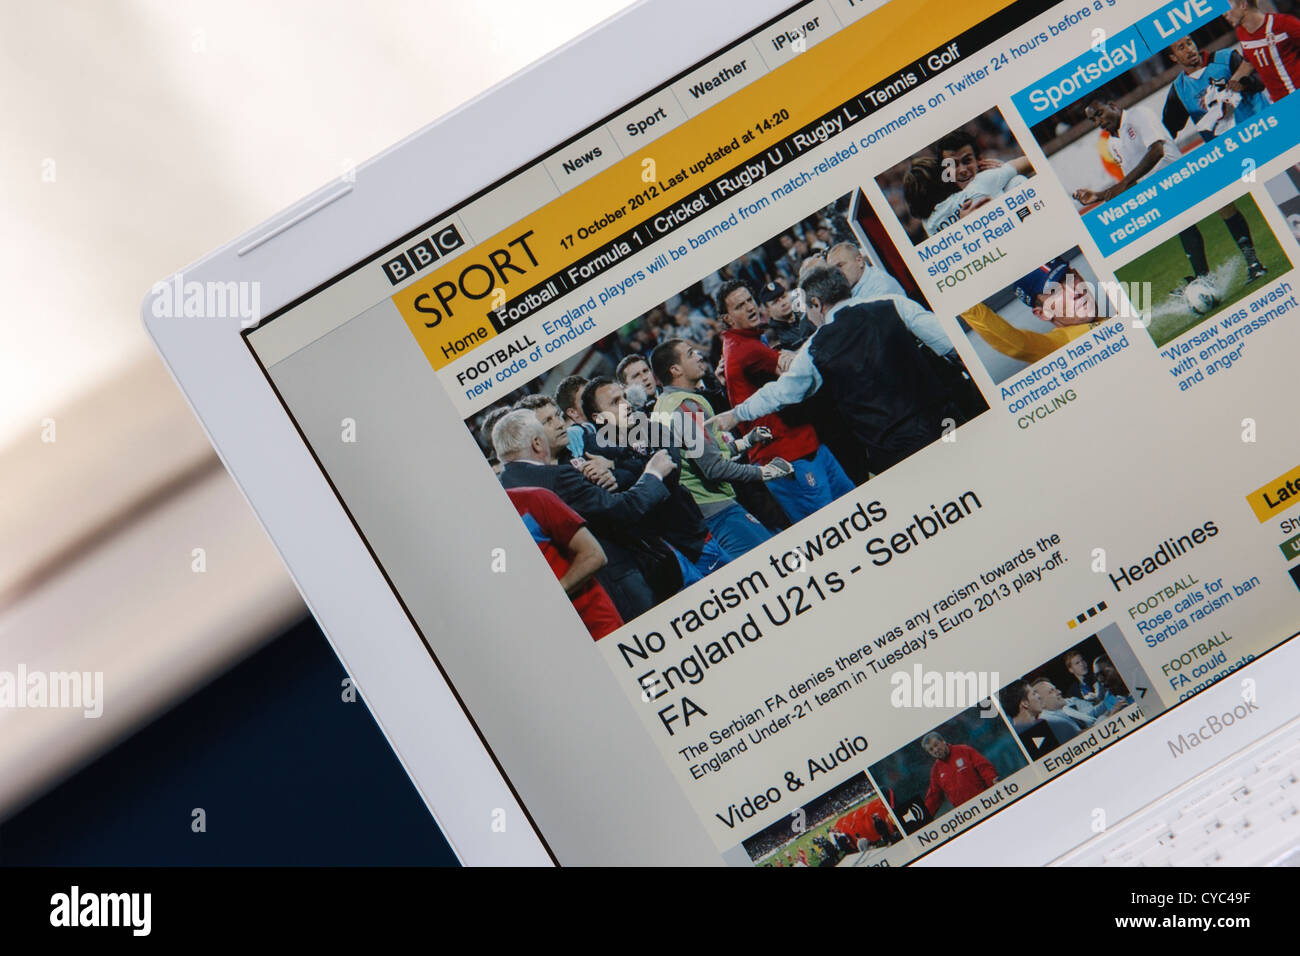 A web page from the BBC sport website is photographed being viewed on a laptop computer screen. Stock Photo